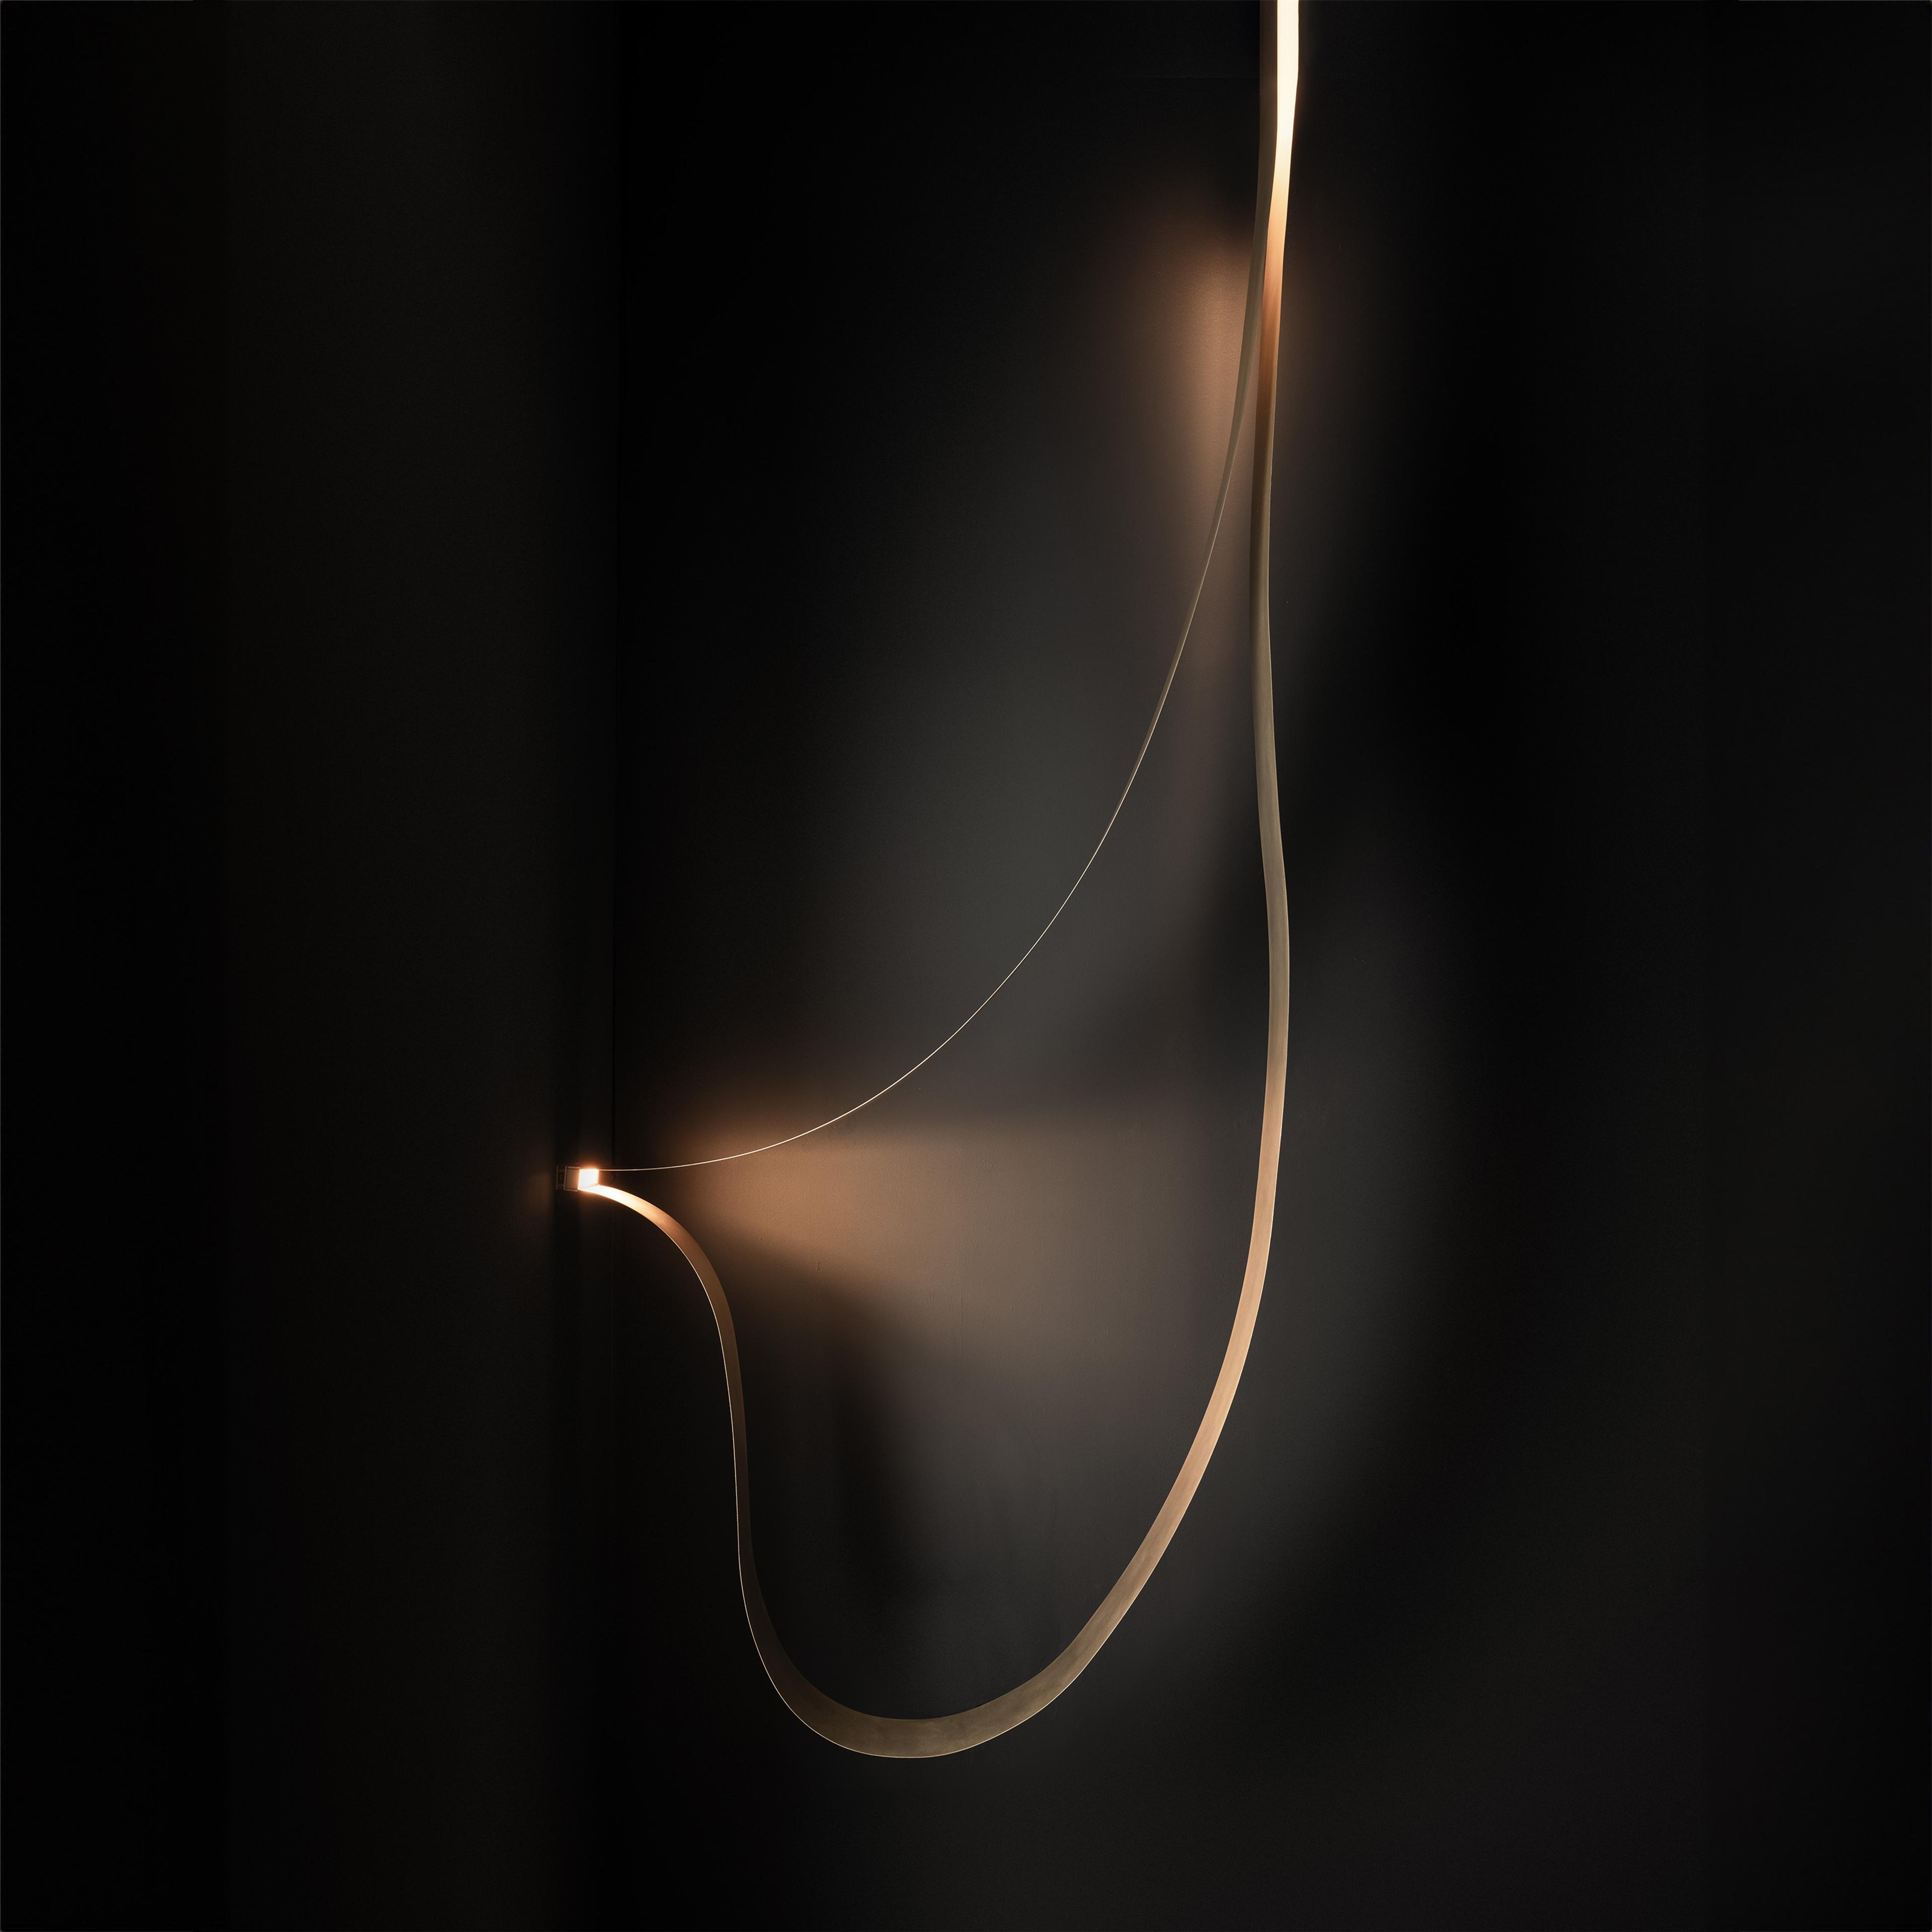 Hector Esrawe Ateliers Courbet Parabola Lights Series